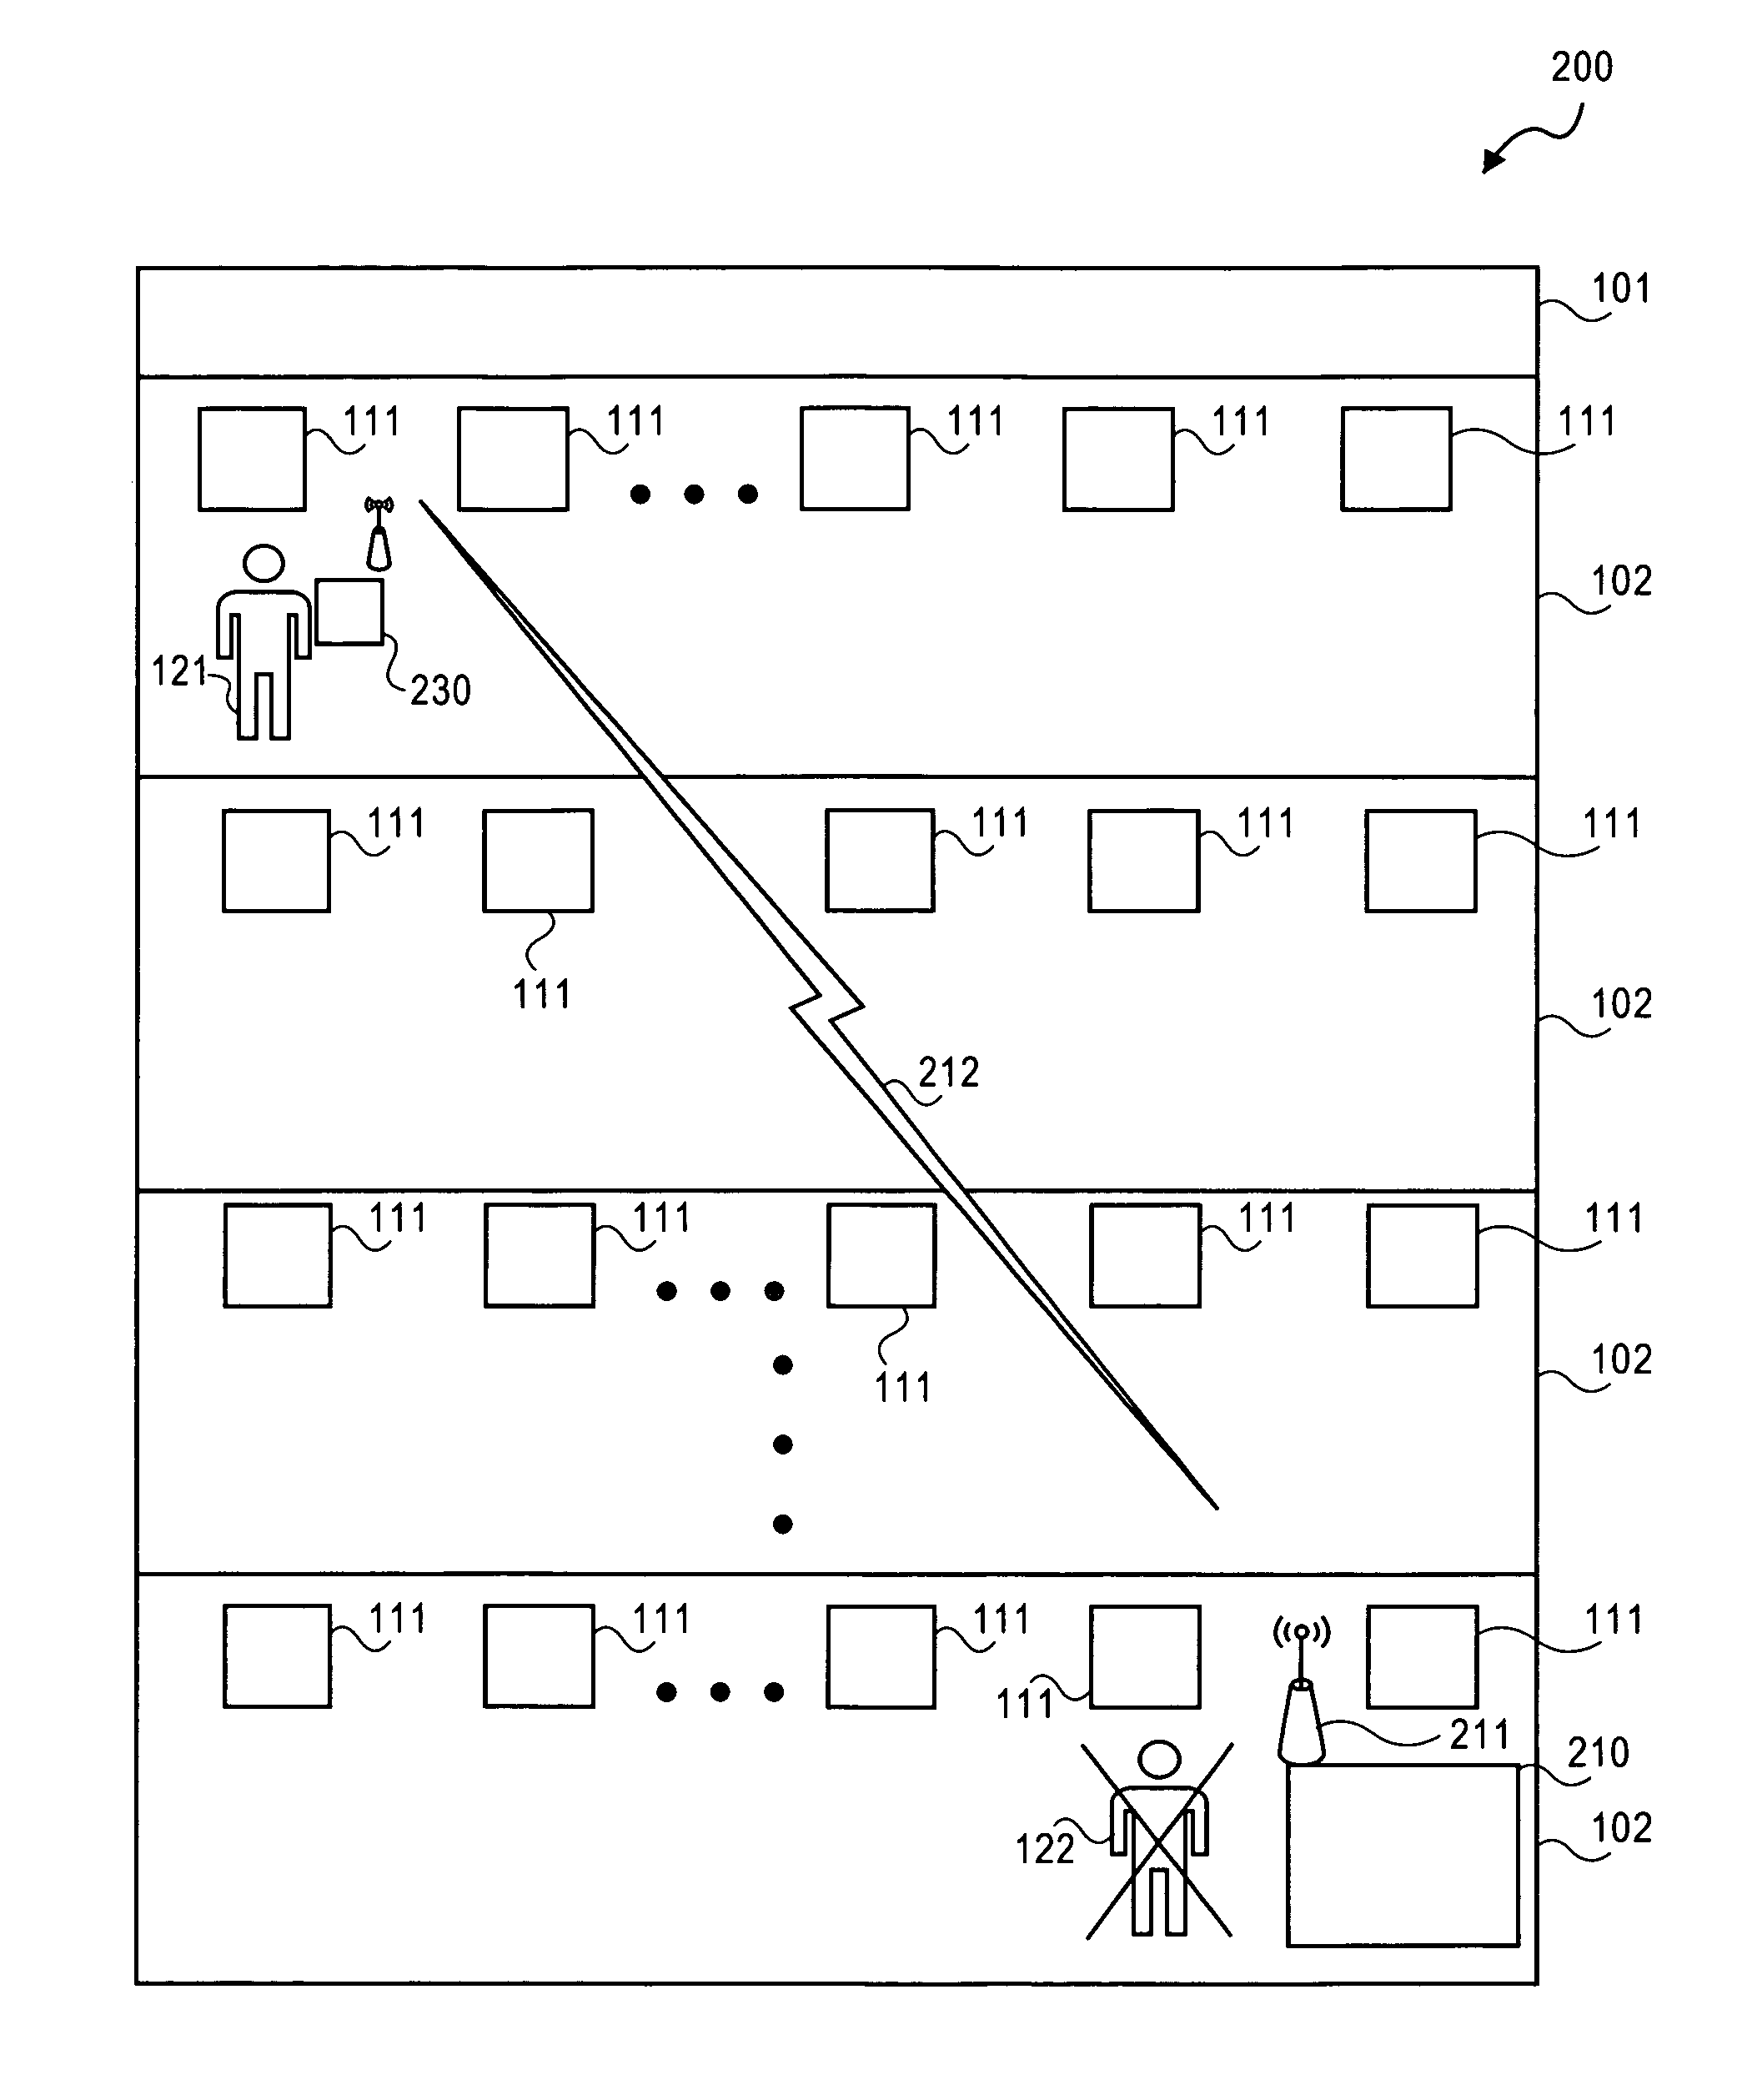 Method and apparatus for authenticated on-site testing, inspection, servicing and control of life-safety equipment and reporting of same using a remote accessory